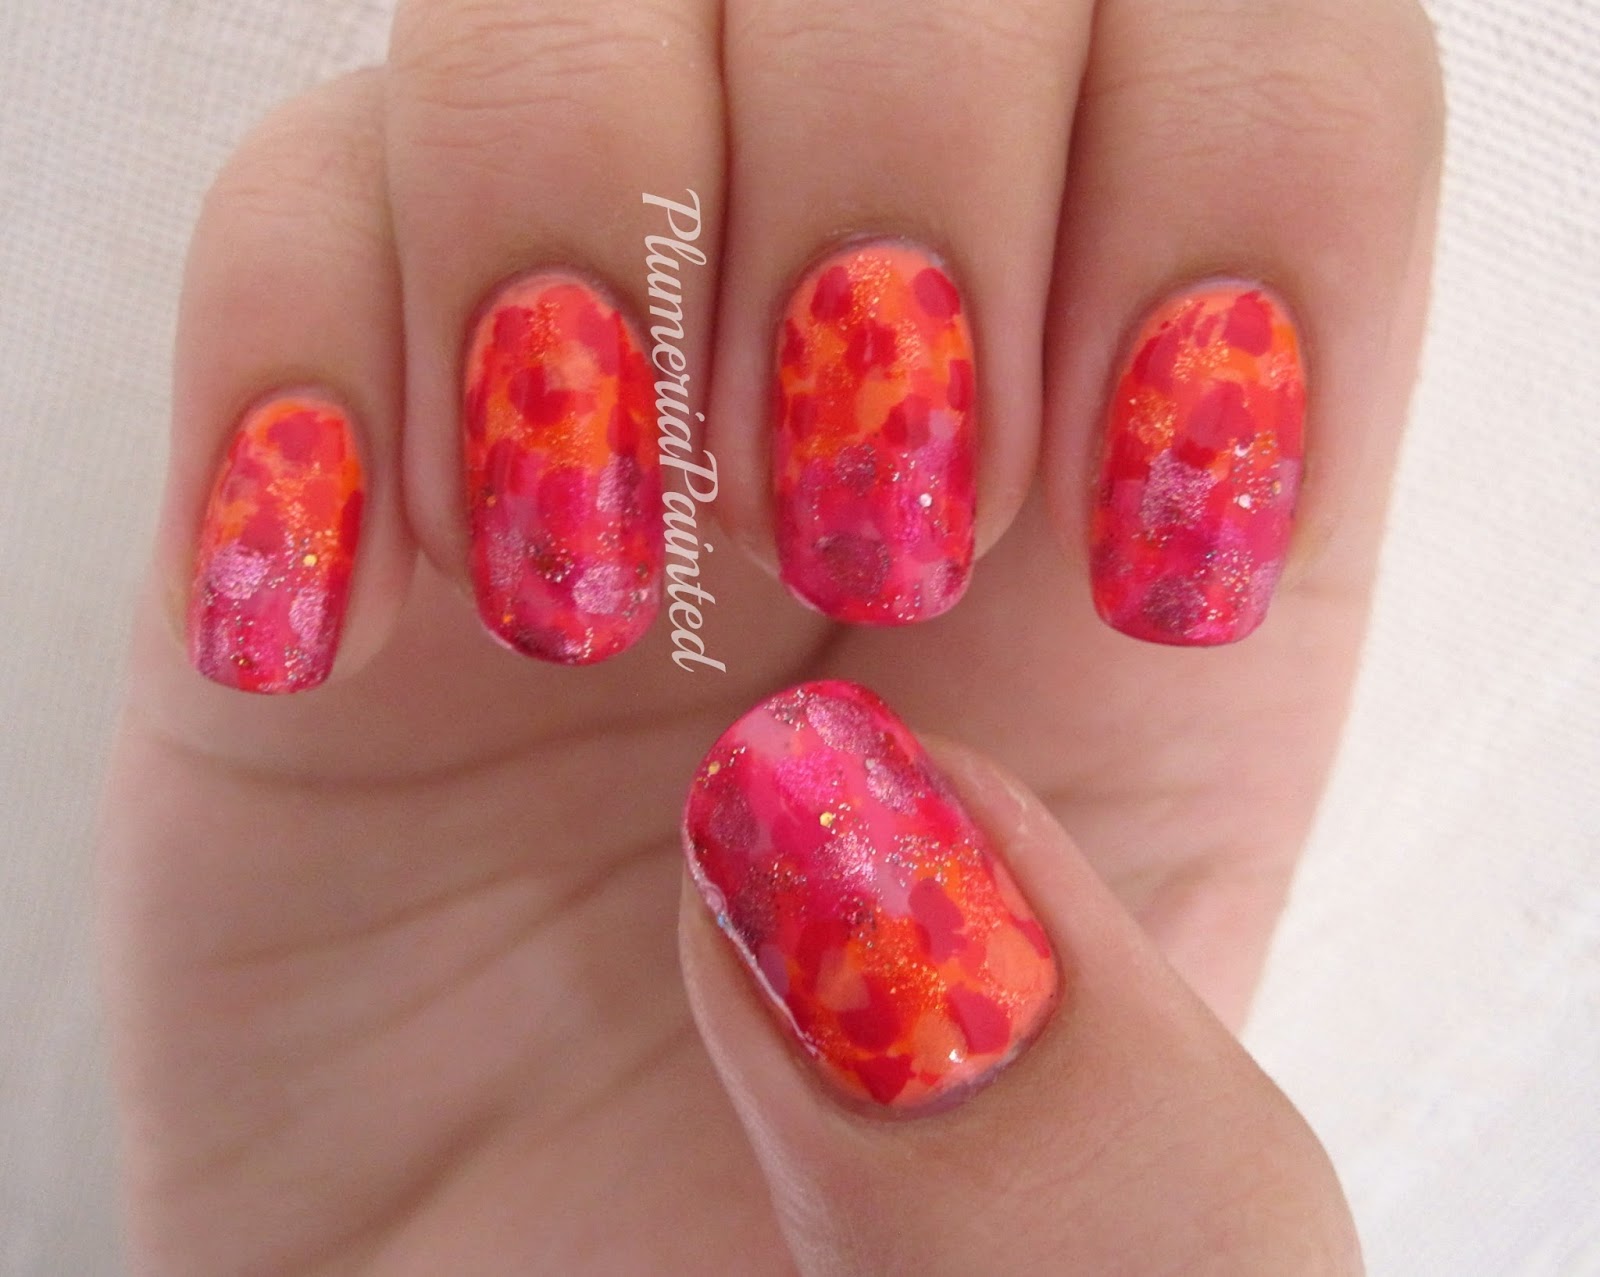 10. "Fish Scale Nail Art with Rhinestones and Gems" - wide 2